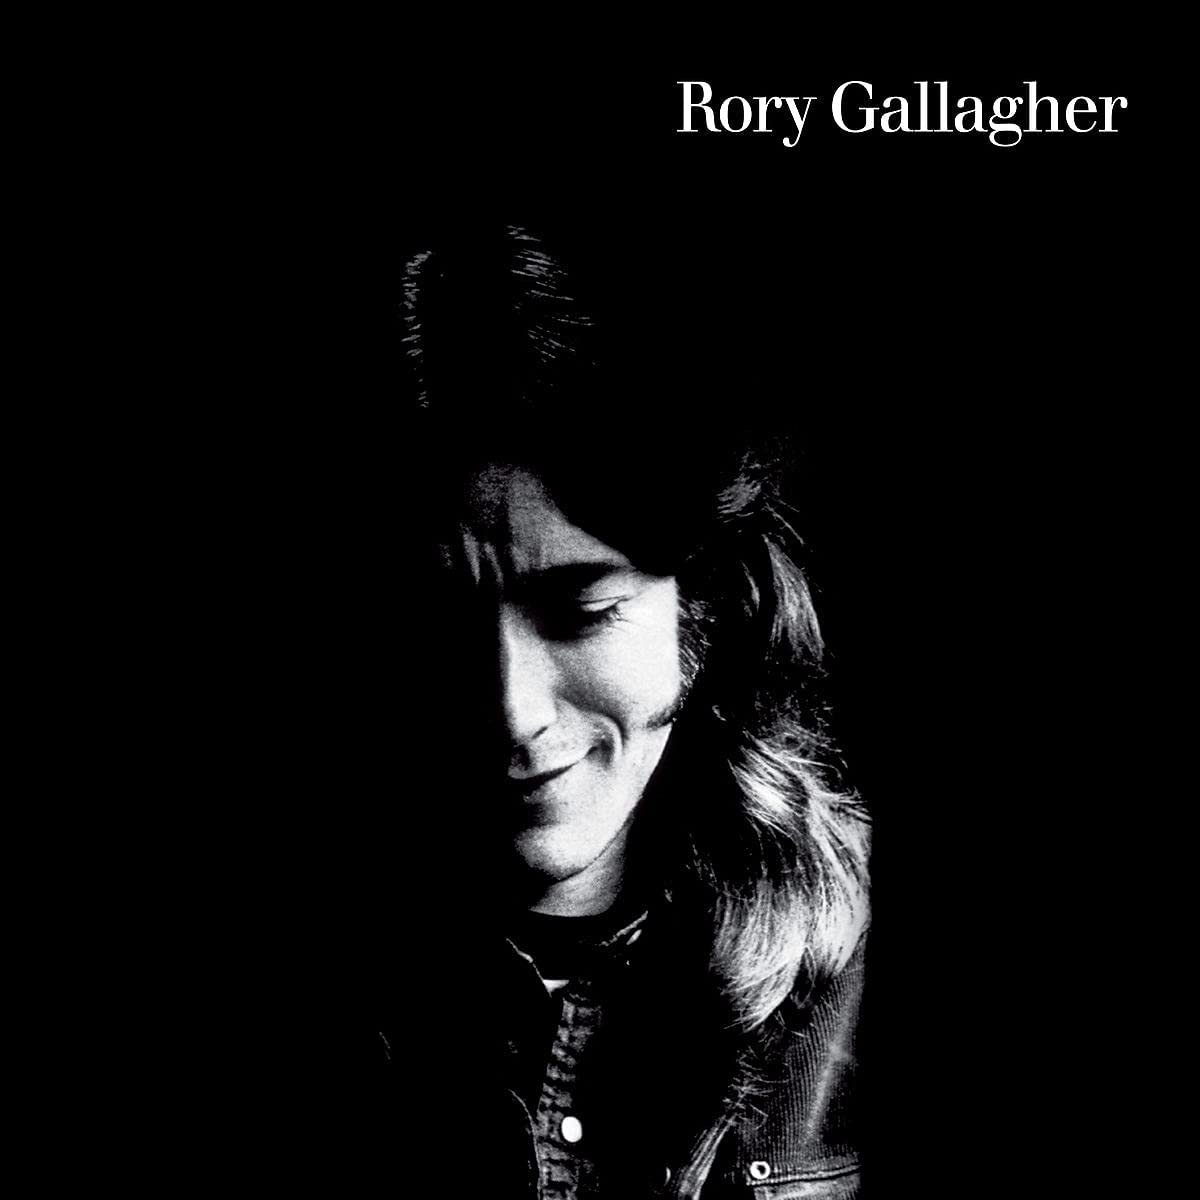 Rory Gallagher - Rory Gallagher (50th Anniversary Edition) - 4CD/DVD